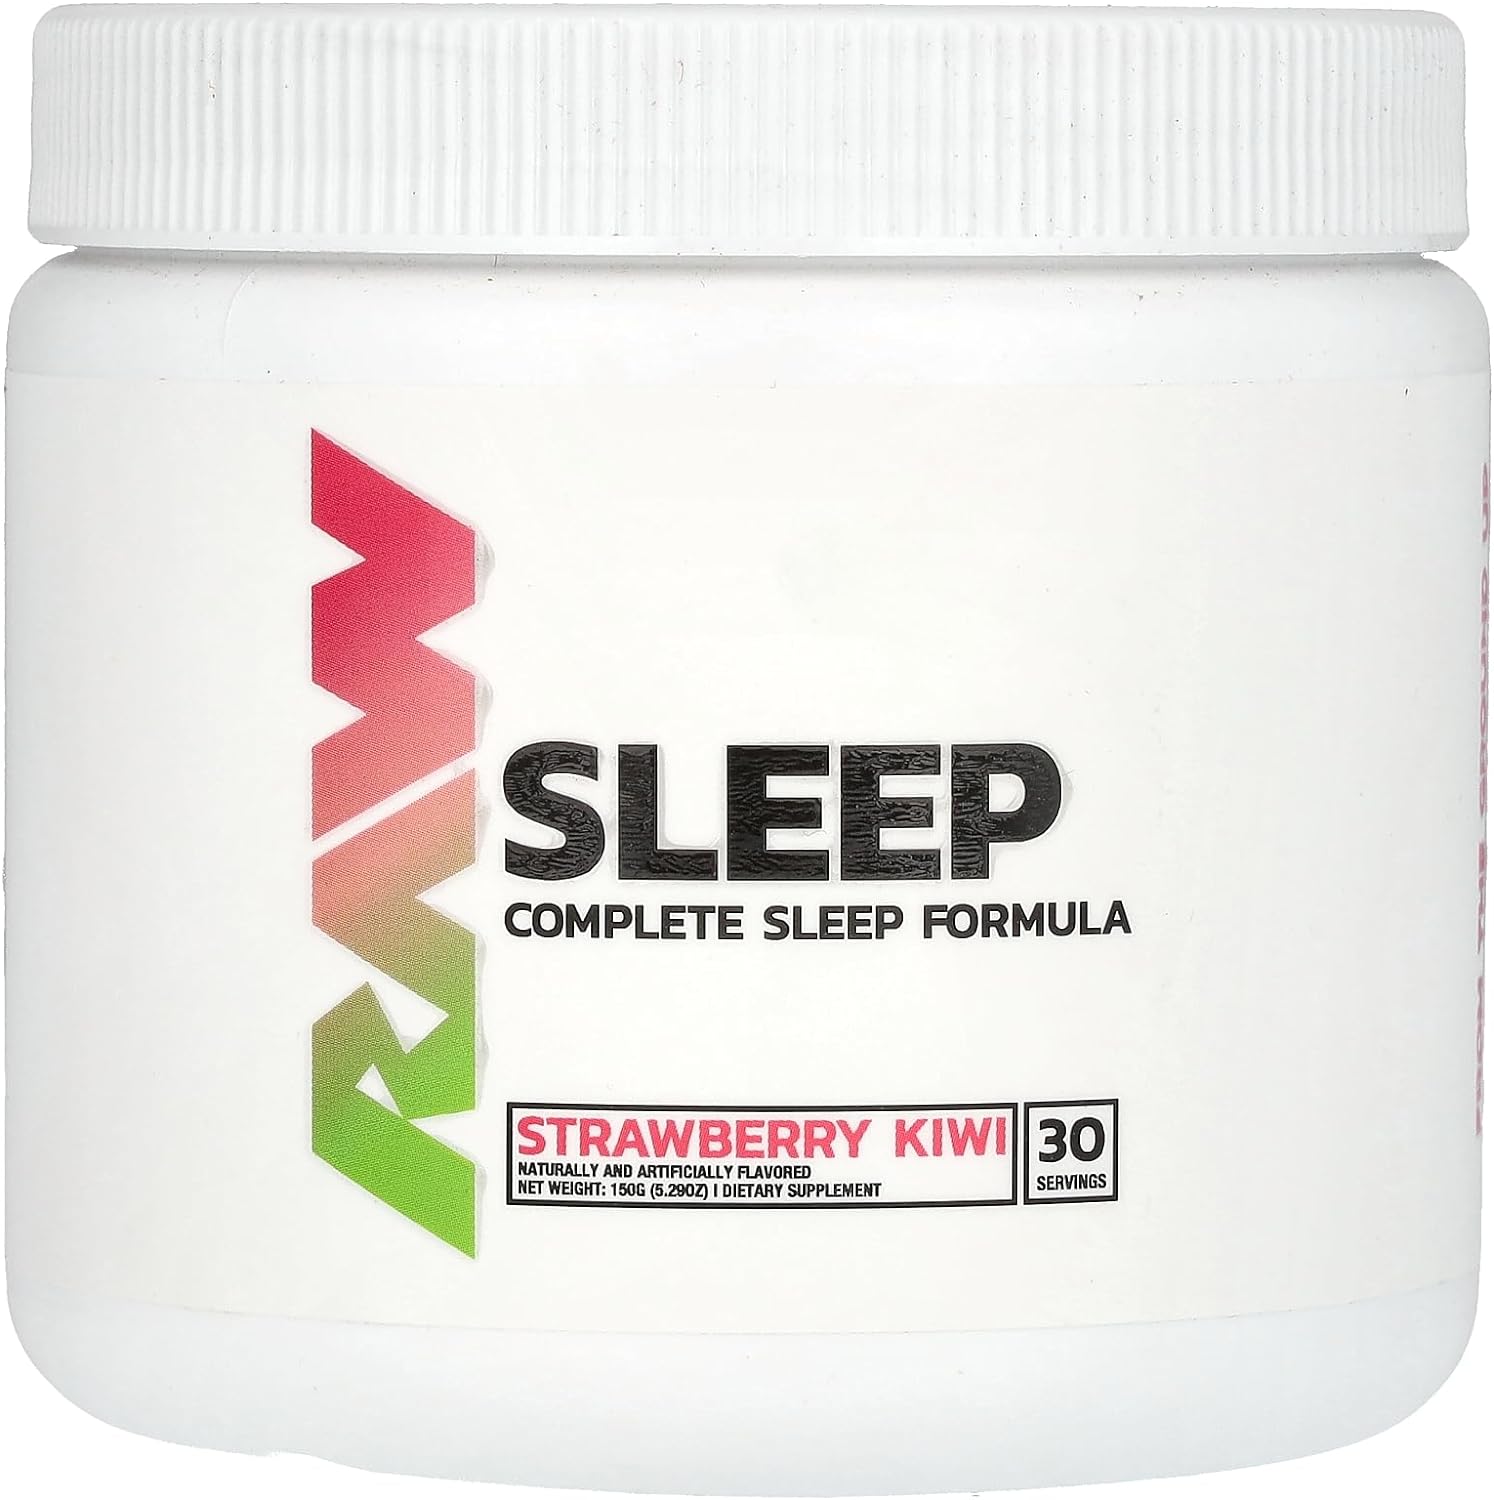 RAW Natural Sleep Aid Supplement - Relaxation Enhancer & Mood Support with Melatonin, Magnesium, Zinc, L-Tryptophan & Lemon Balm Extract to Relax & Calm The Mind & Body - 30 Servings, Strawberry Kiwi